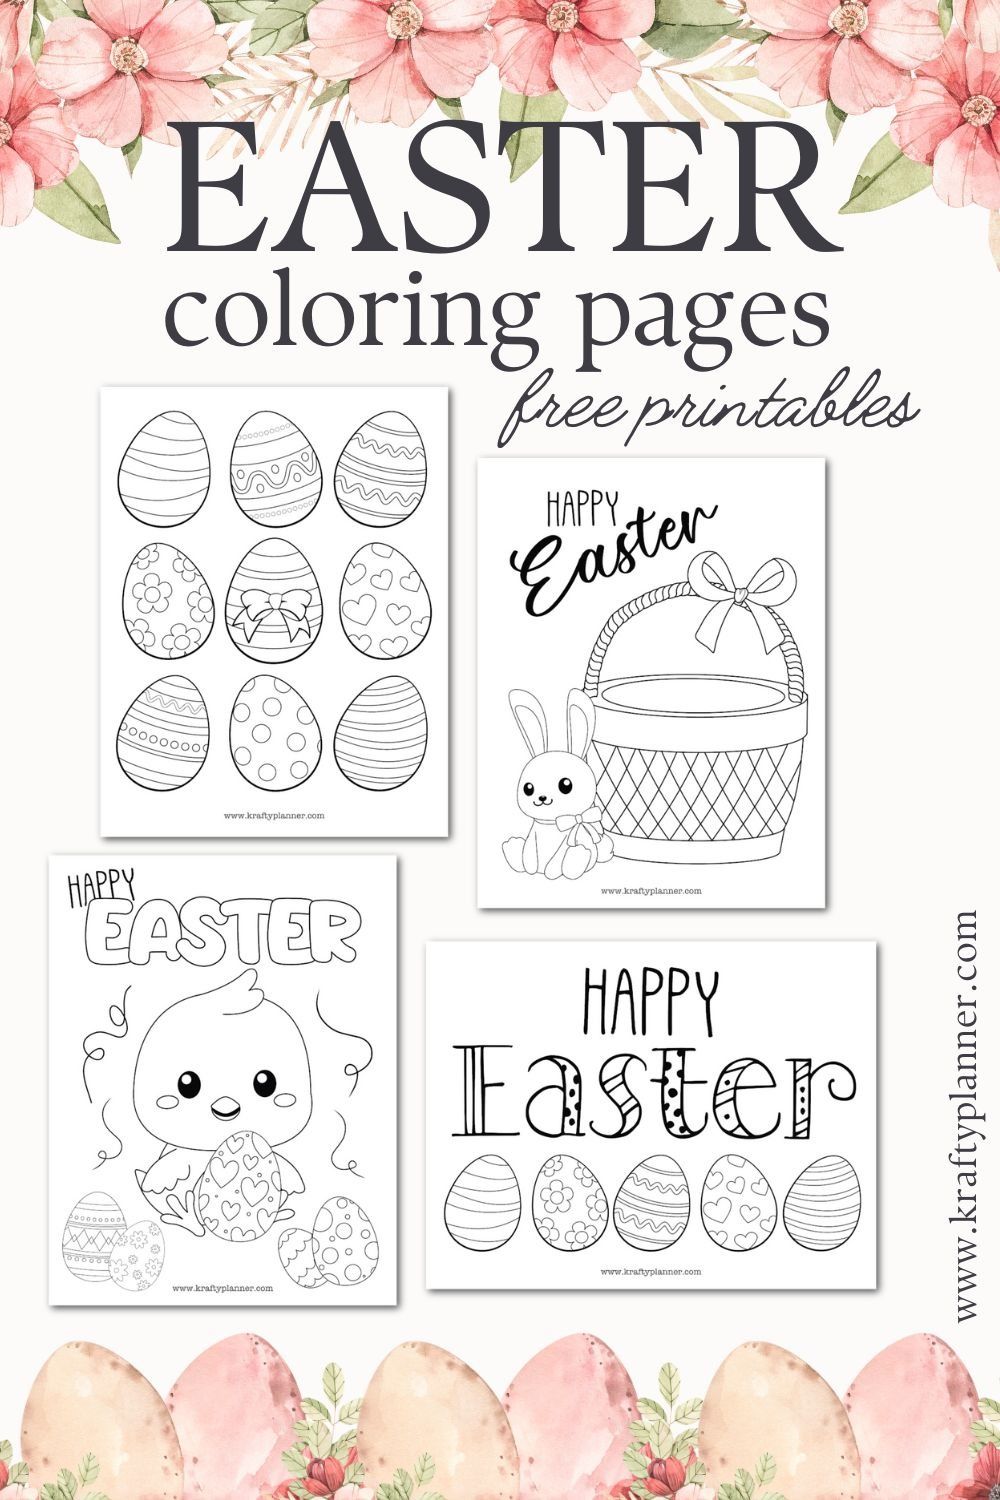 Egg-cellent Easter Coloring Sheets: Free Printables for Holiday Cheer